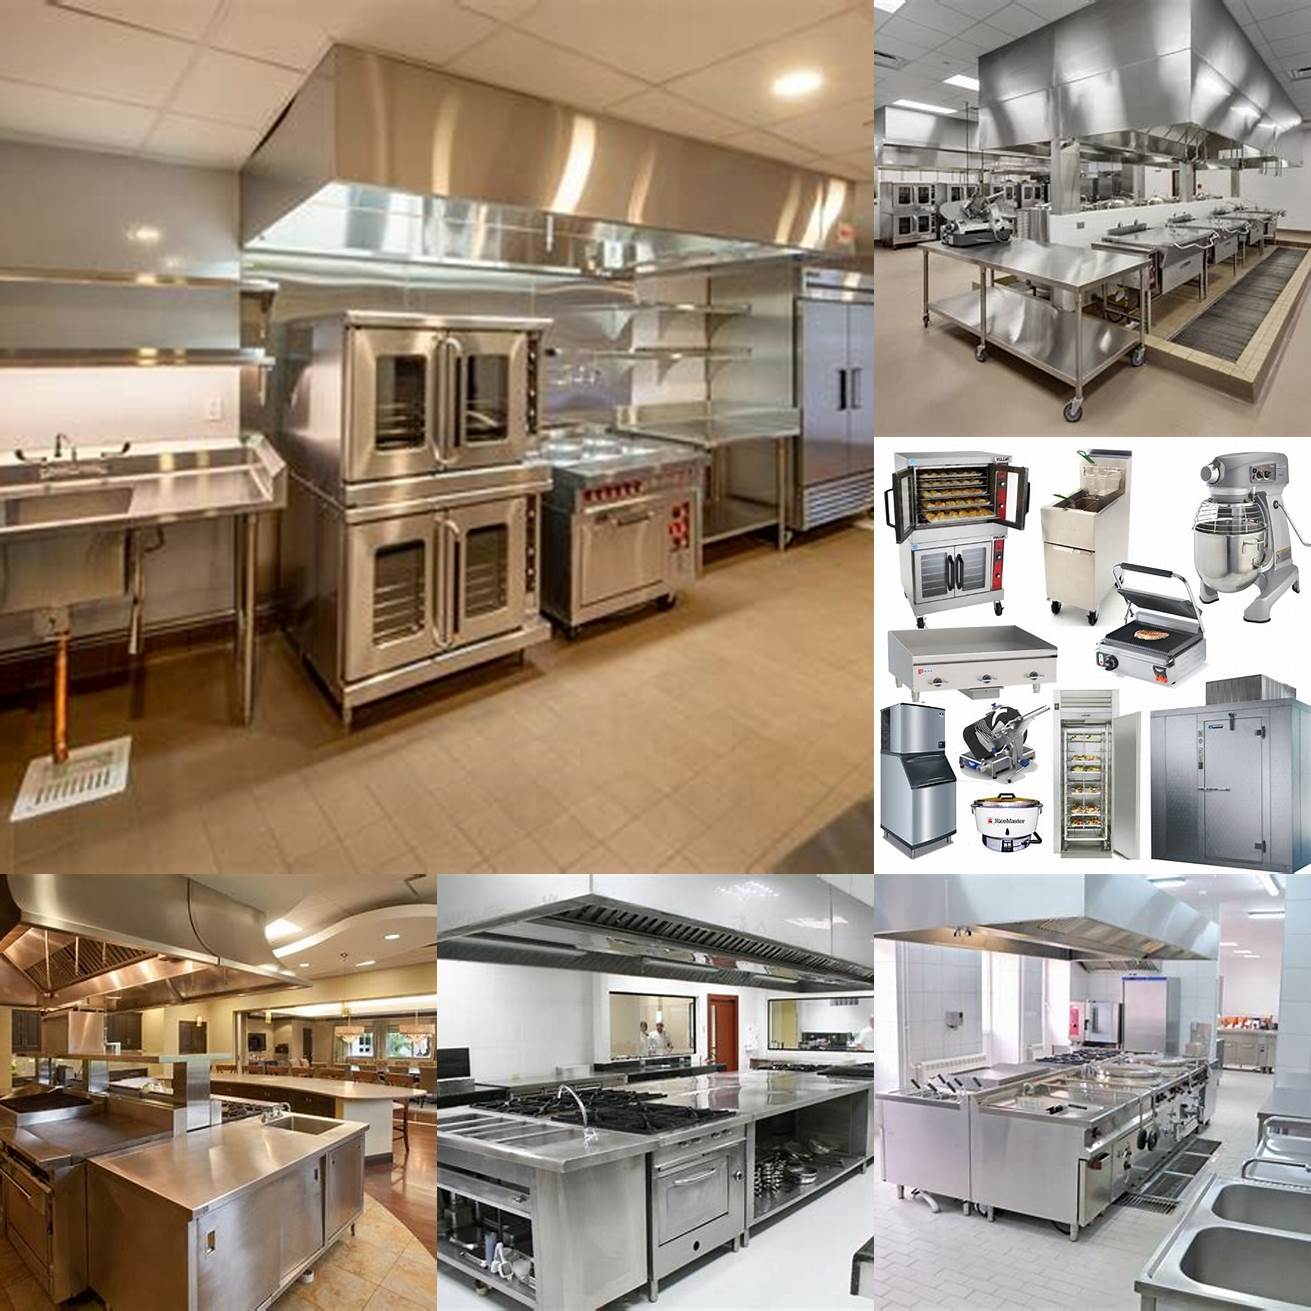 2 Better food quality Commercial kitchens are equipped with high-quality appliances and tools that can help you create consistent high-quality dishes This can help you build a loyal customer base and establish a positive reputation in the industry